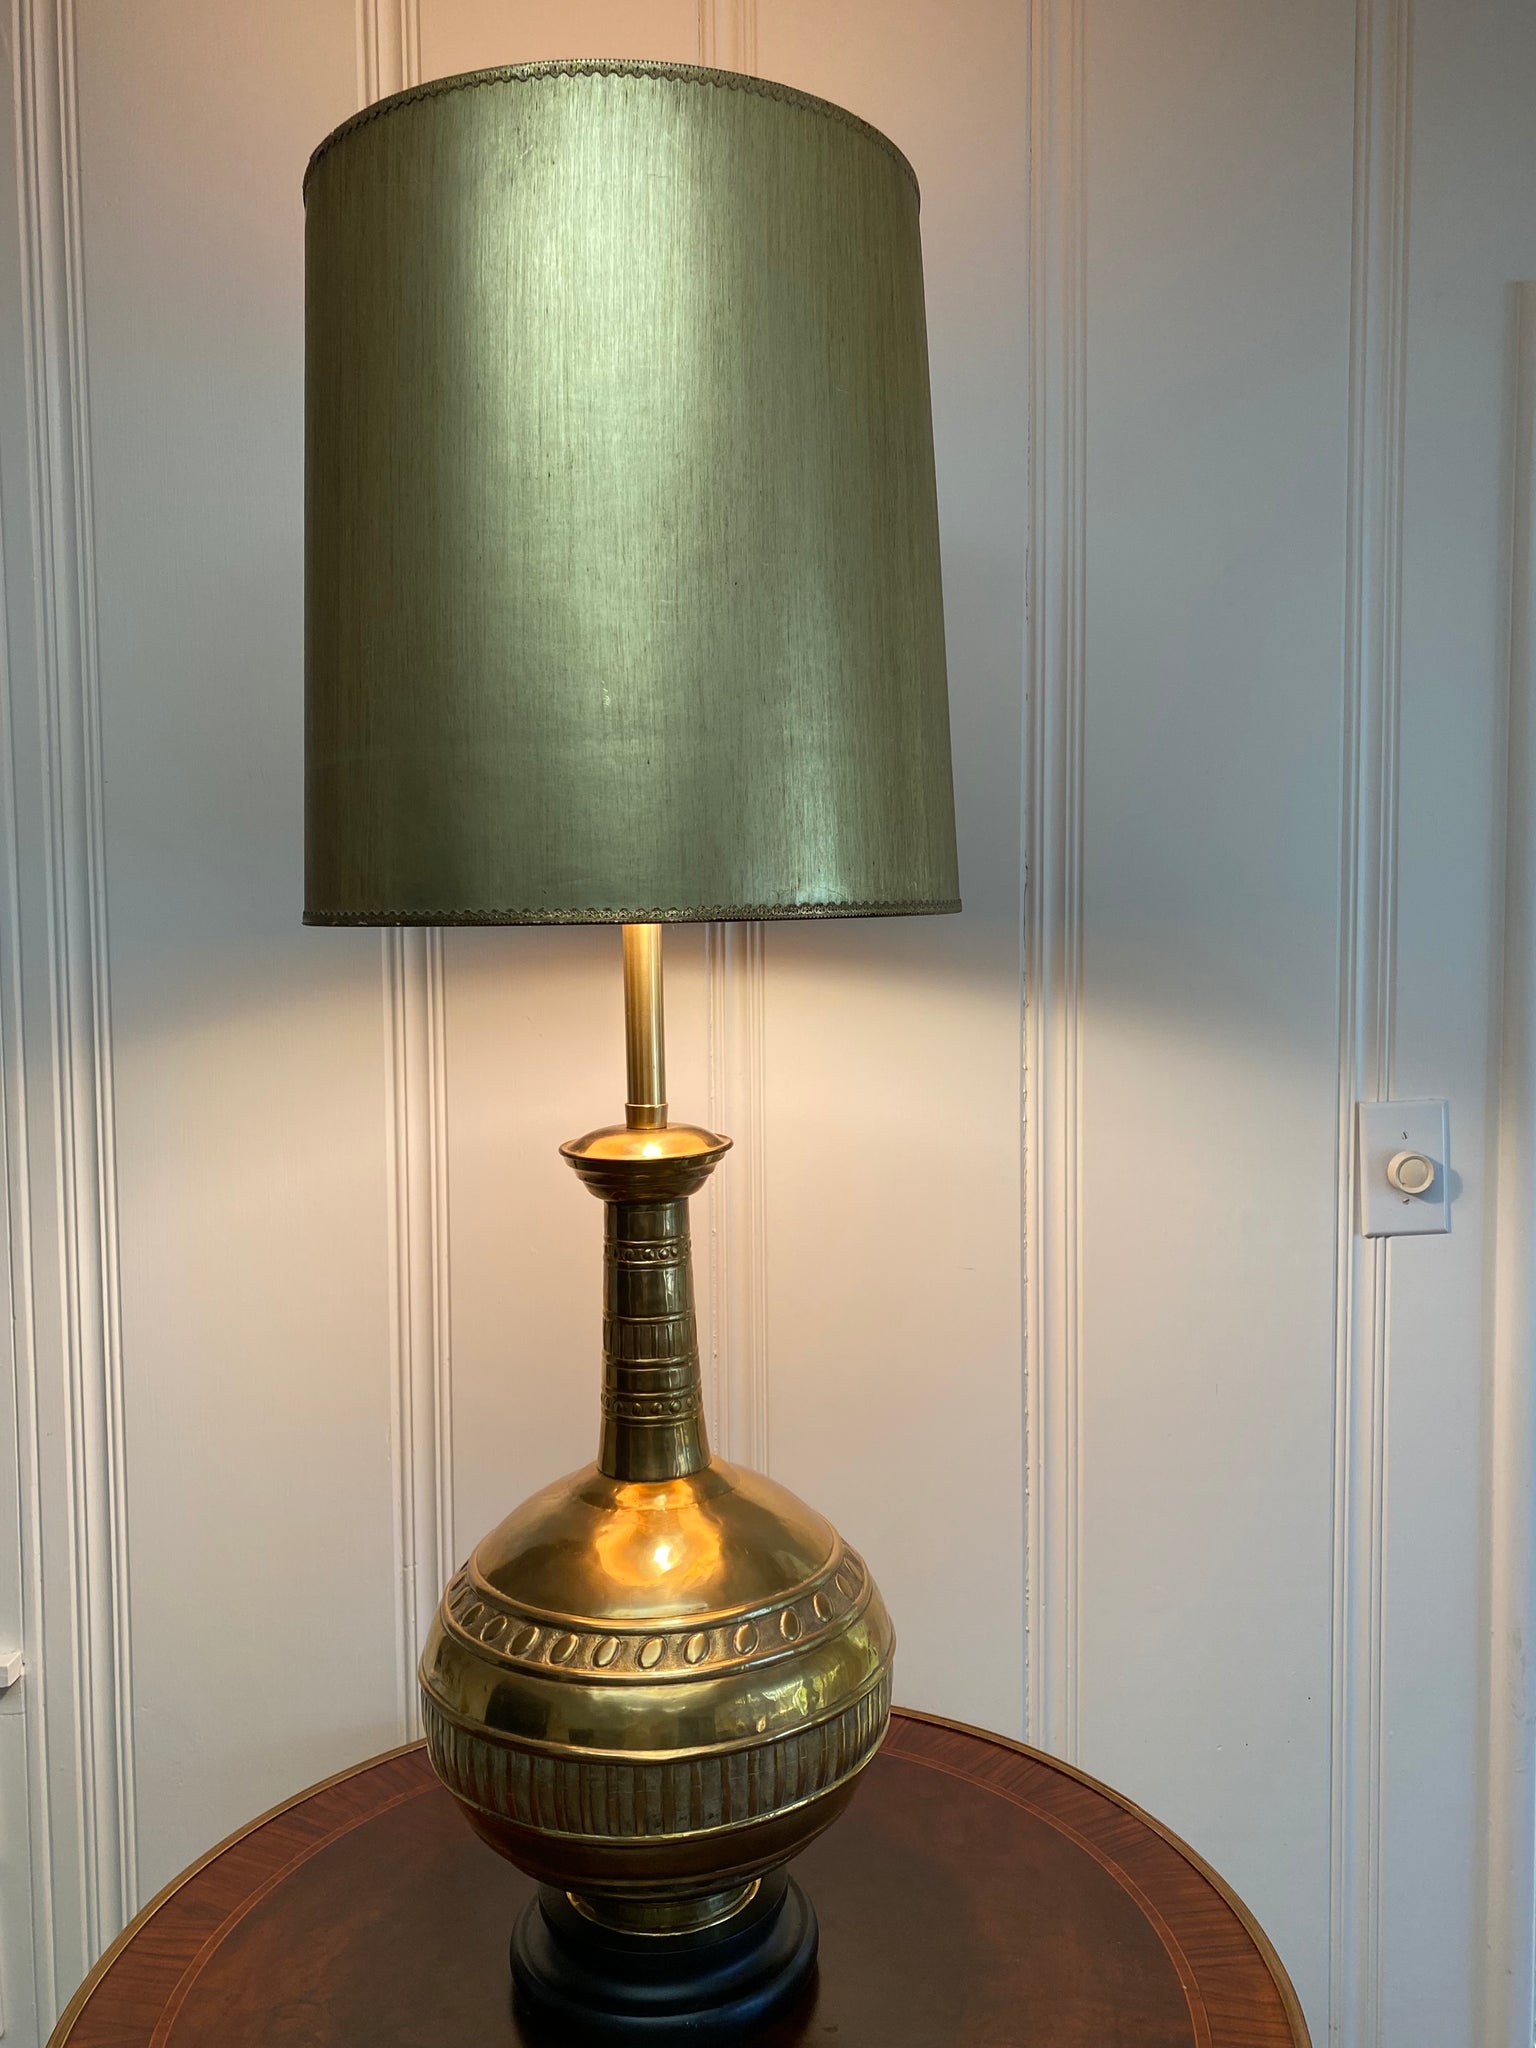 Vintage Marbro Polished Brass Table Lamp – Thoroughly Modern Maggie